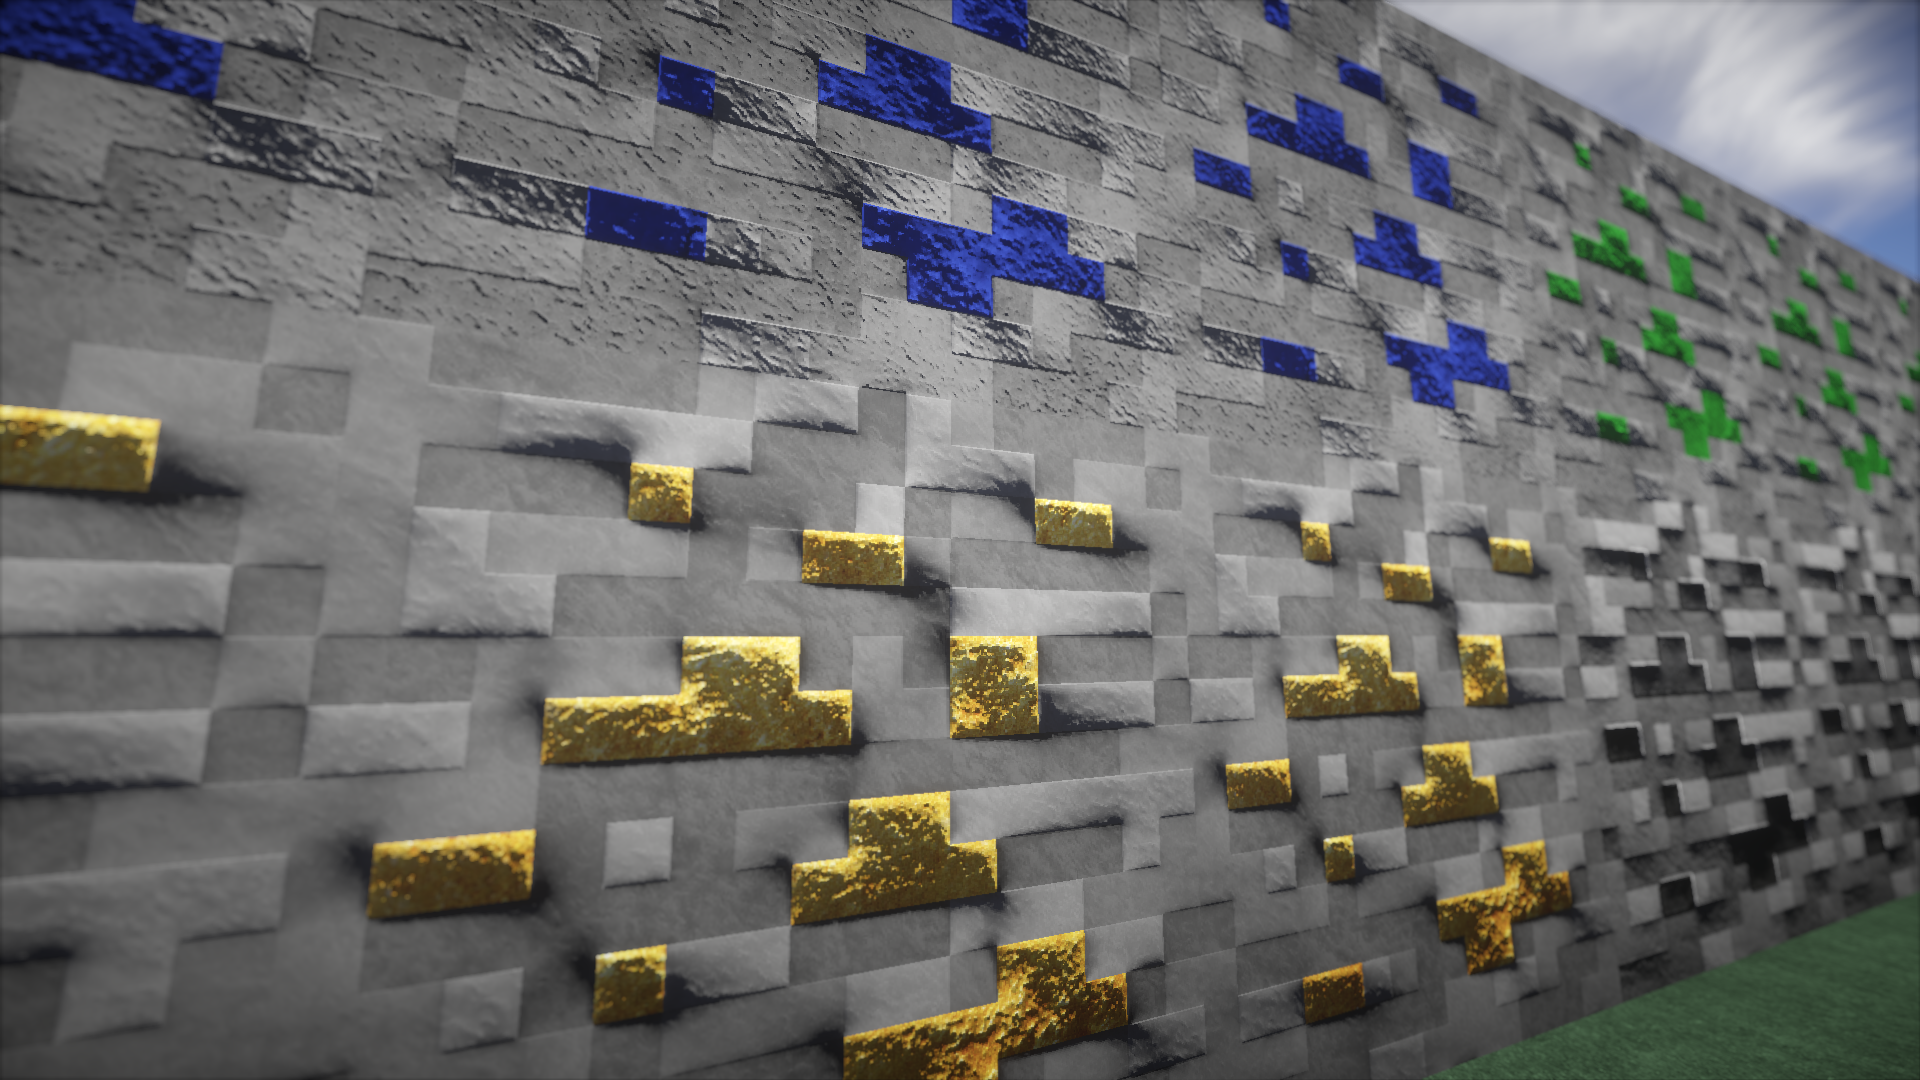 Default Minecraft Texture 512x With Bump Mapping and 